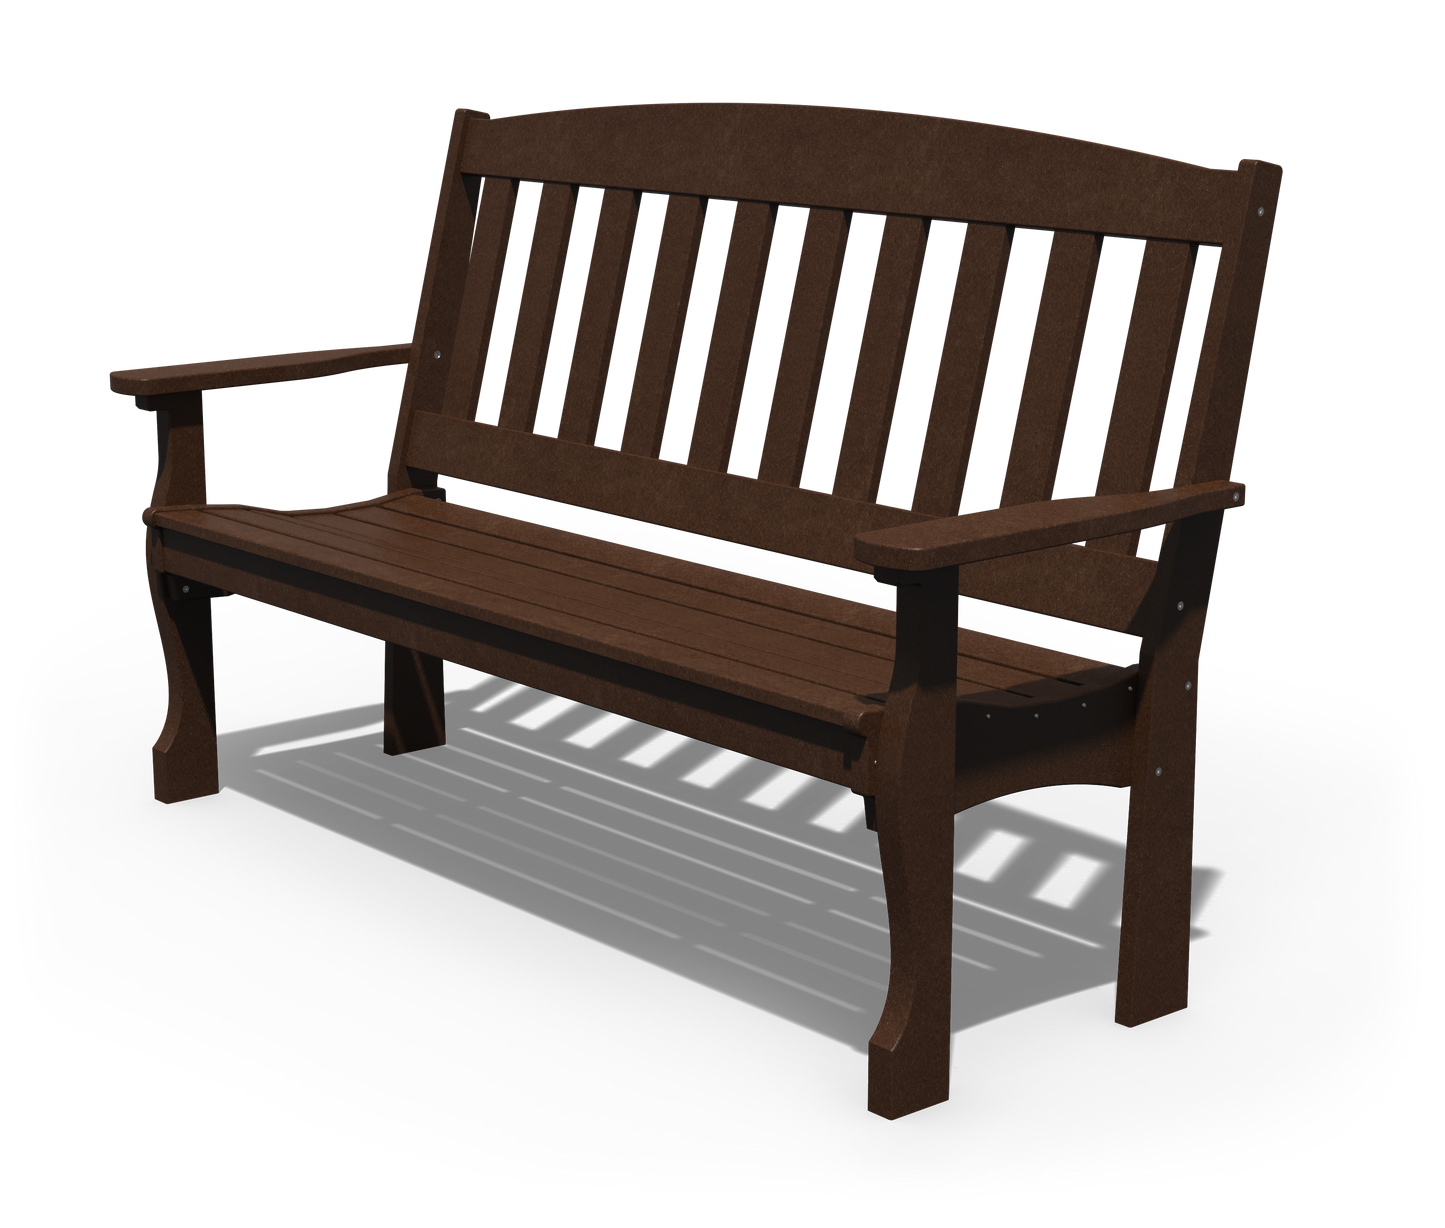 Patiova Recycled Plastic 5′ English Garden Bench - LEAD TIME TO SHIP 4 WEEKS